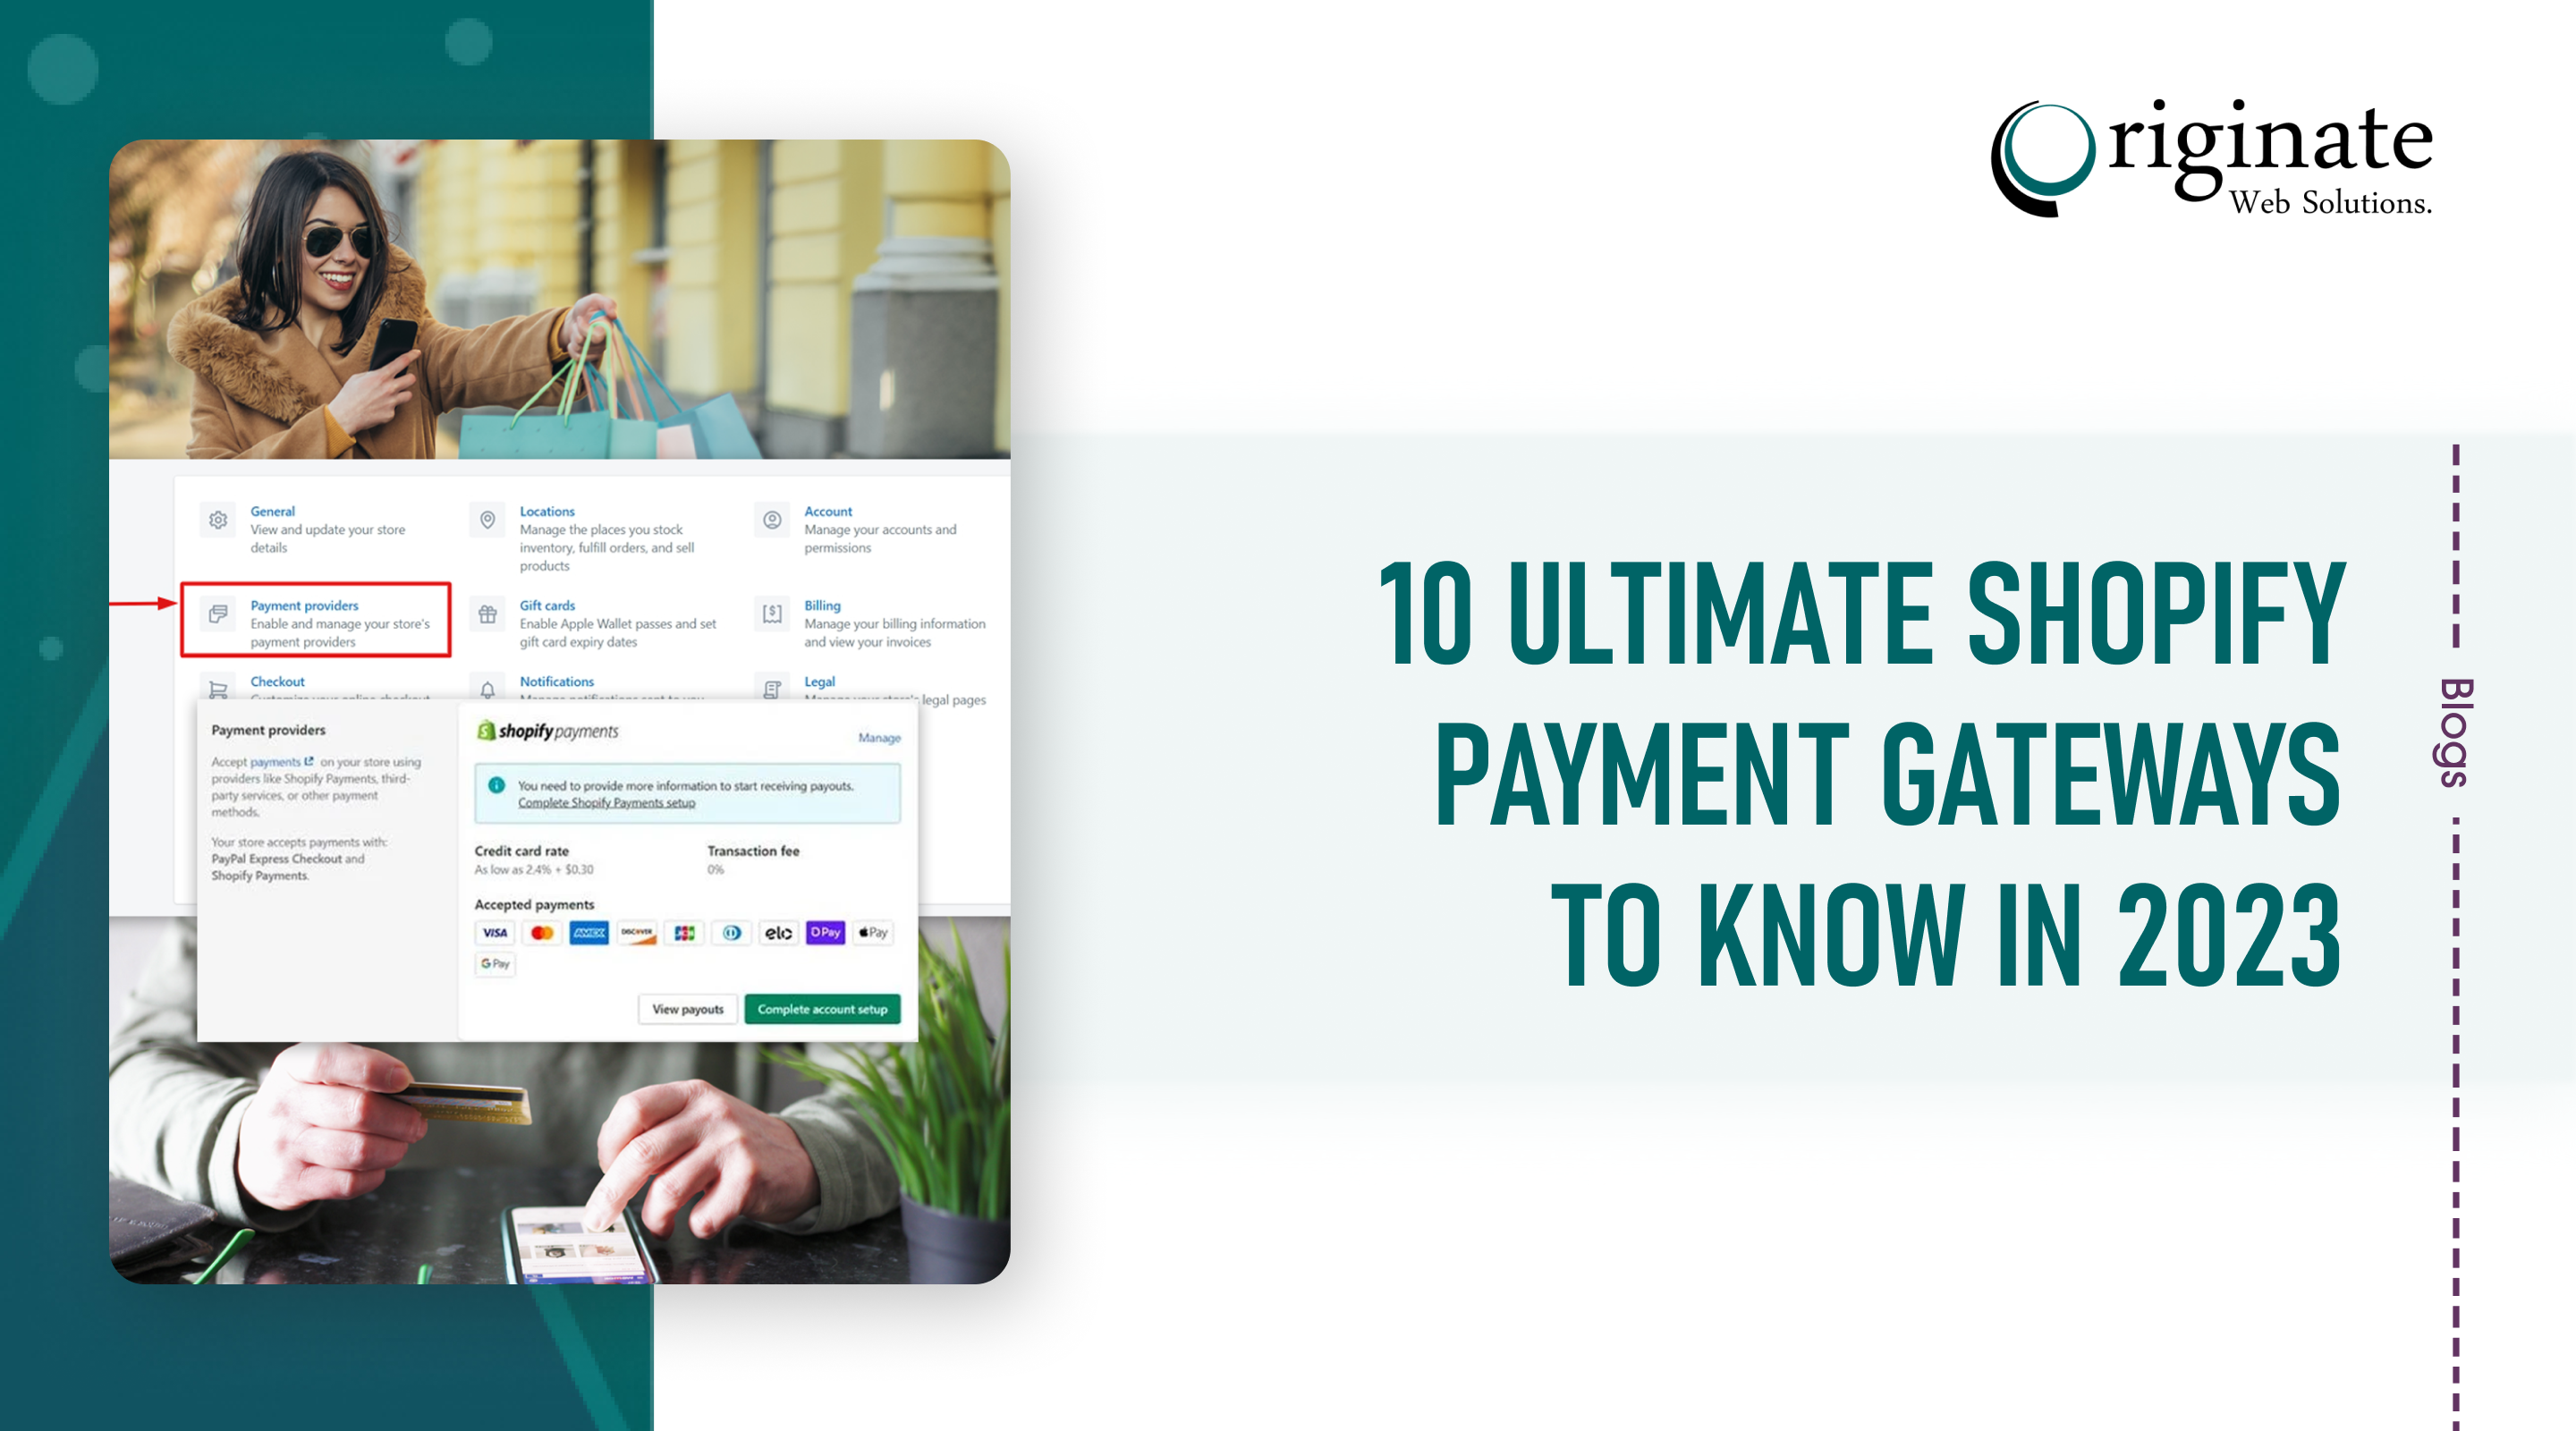 10 Ultimate Shopify Payment Gateways To Know In 2023